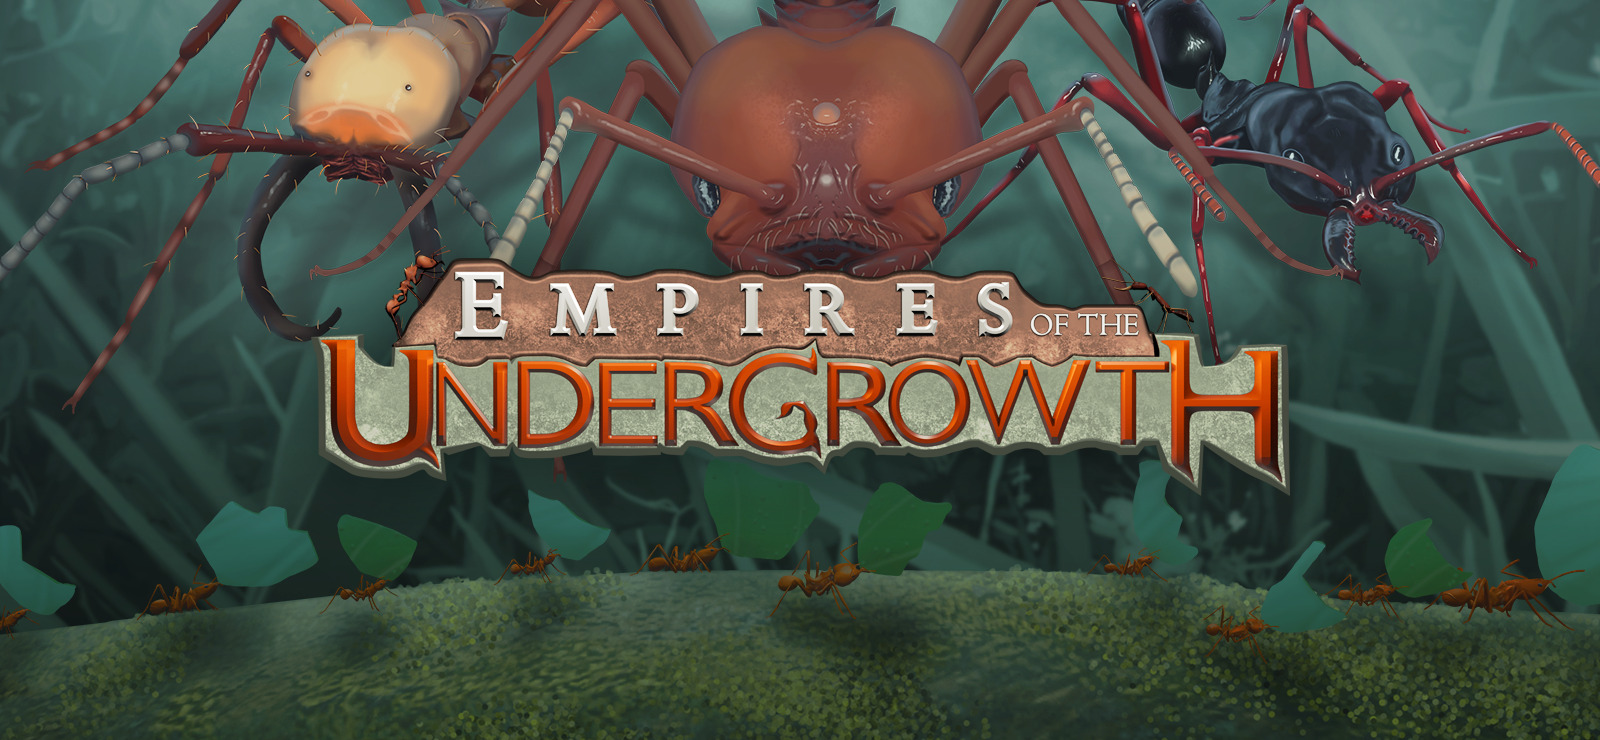 empires of the undergrowth 3.1